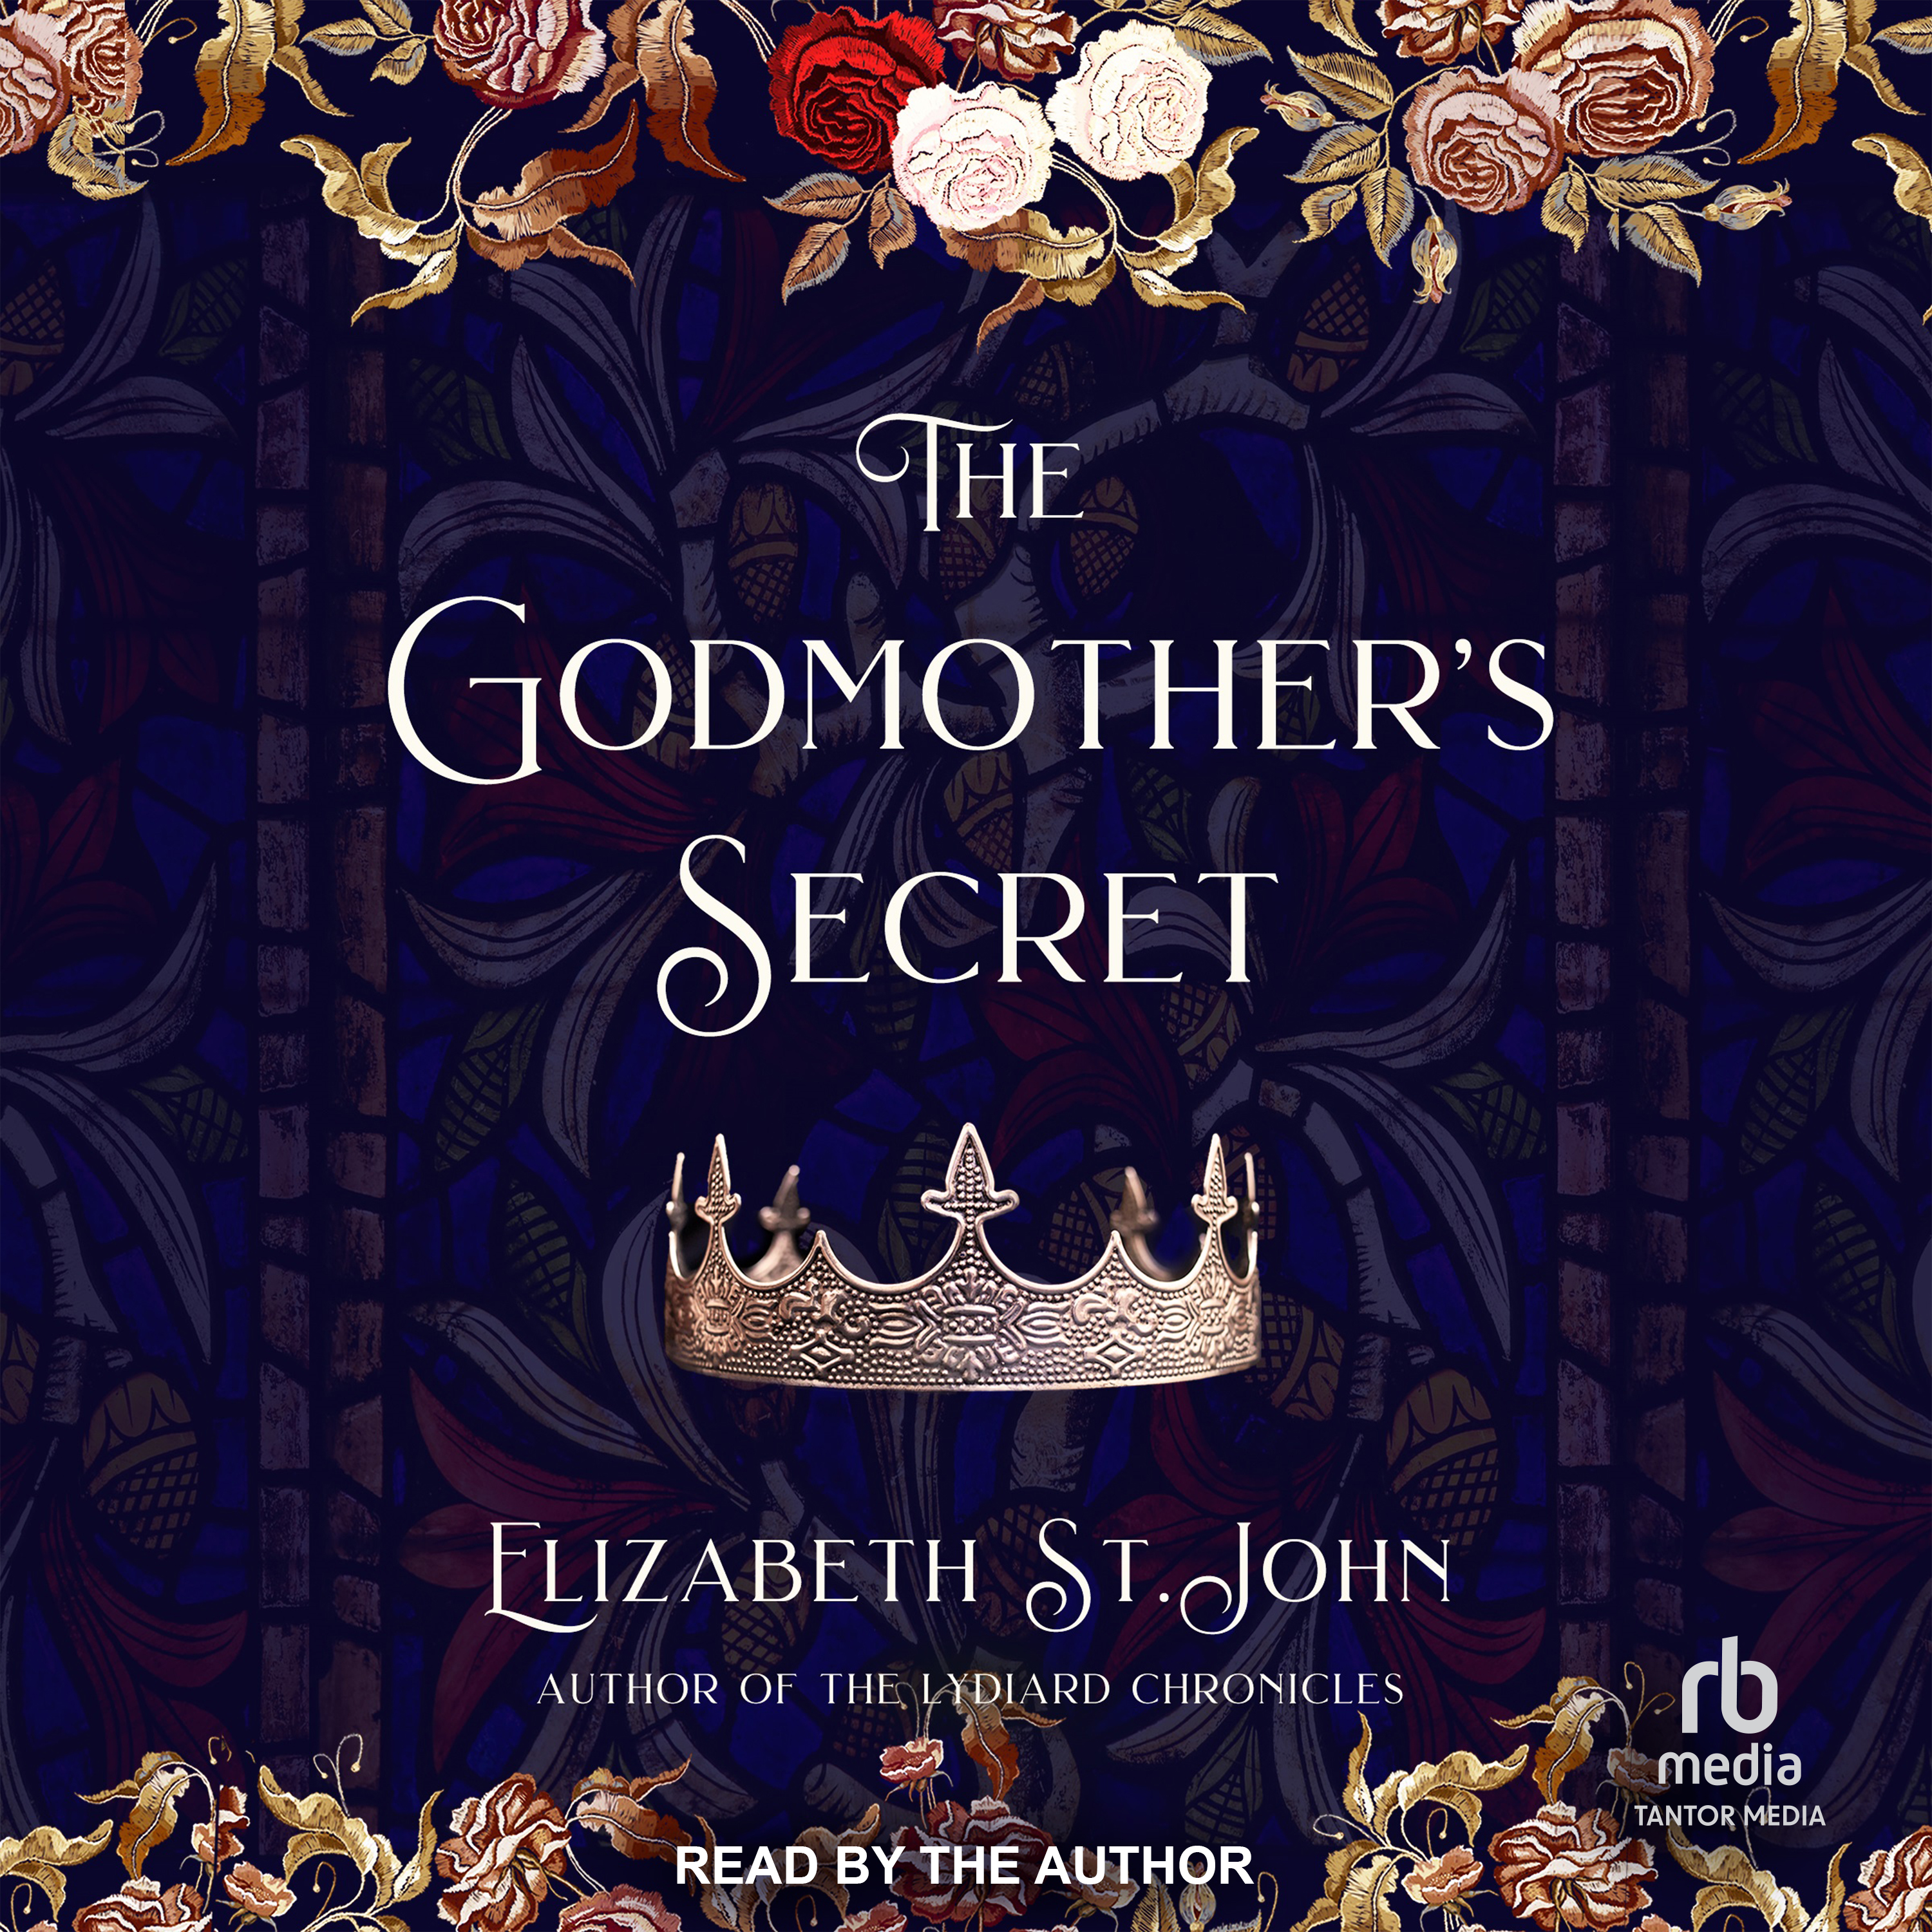 The Godmother's Secret Audiobook Cover